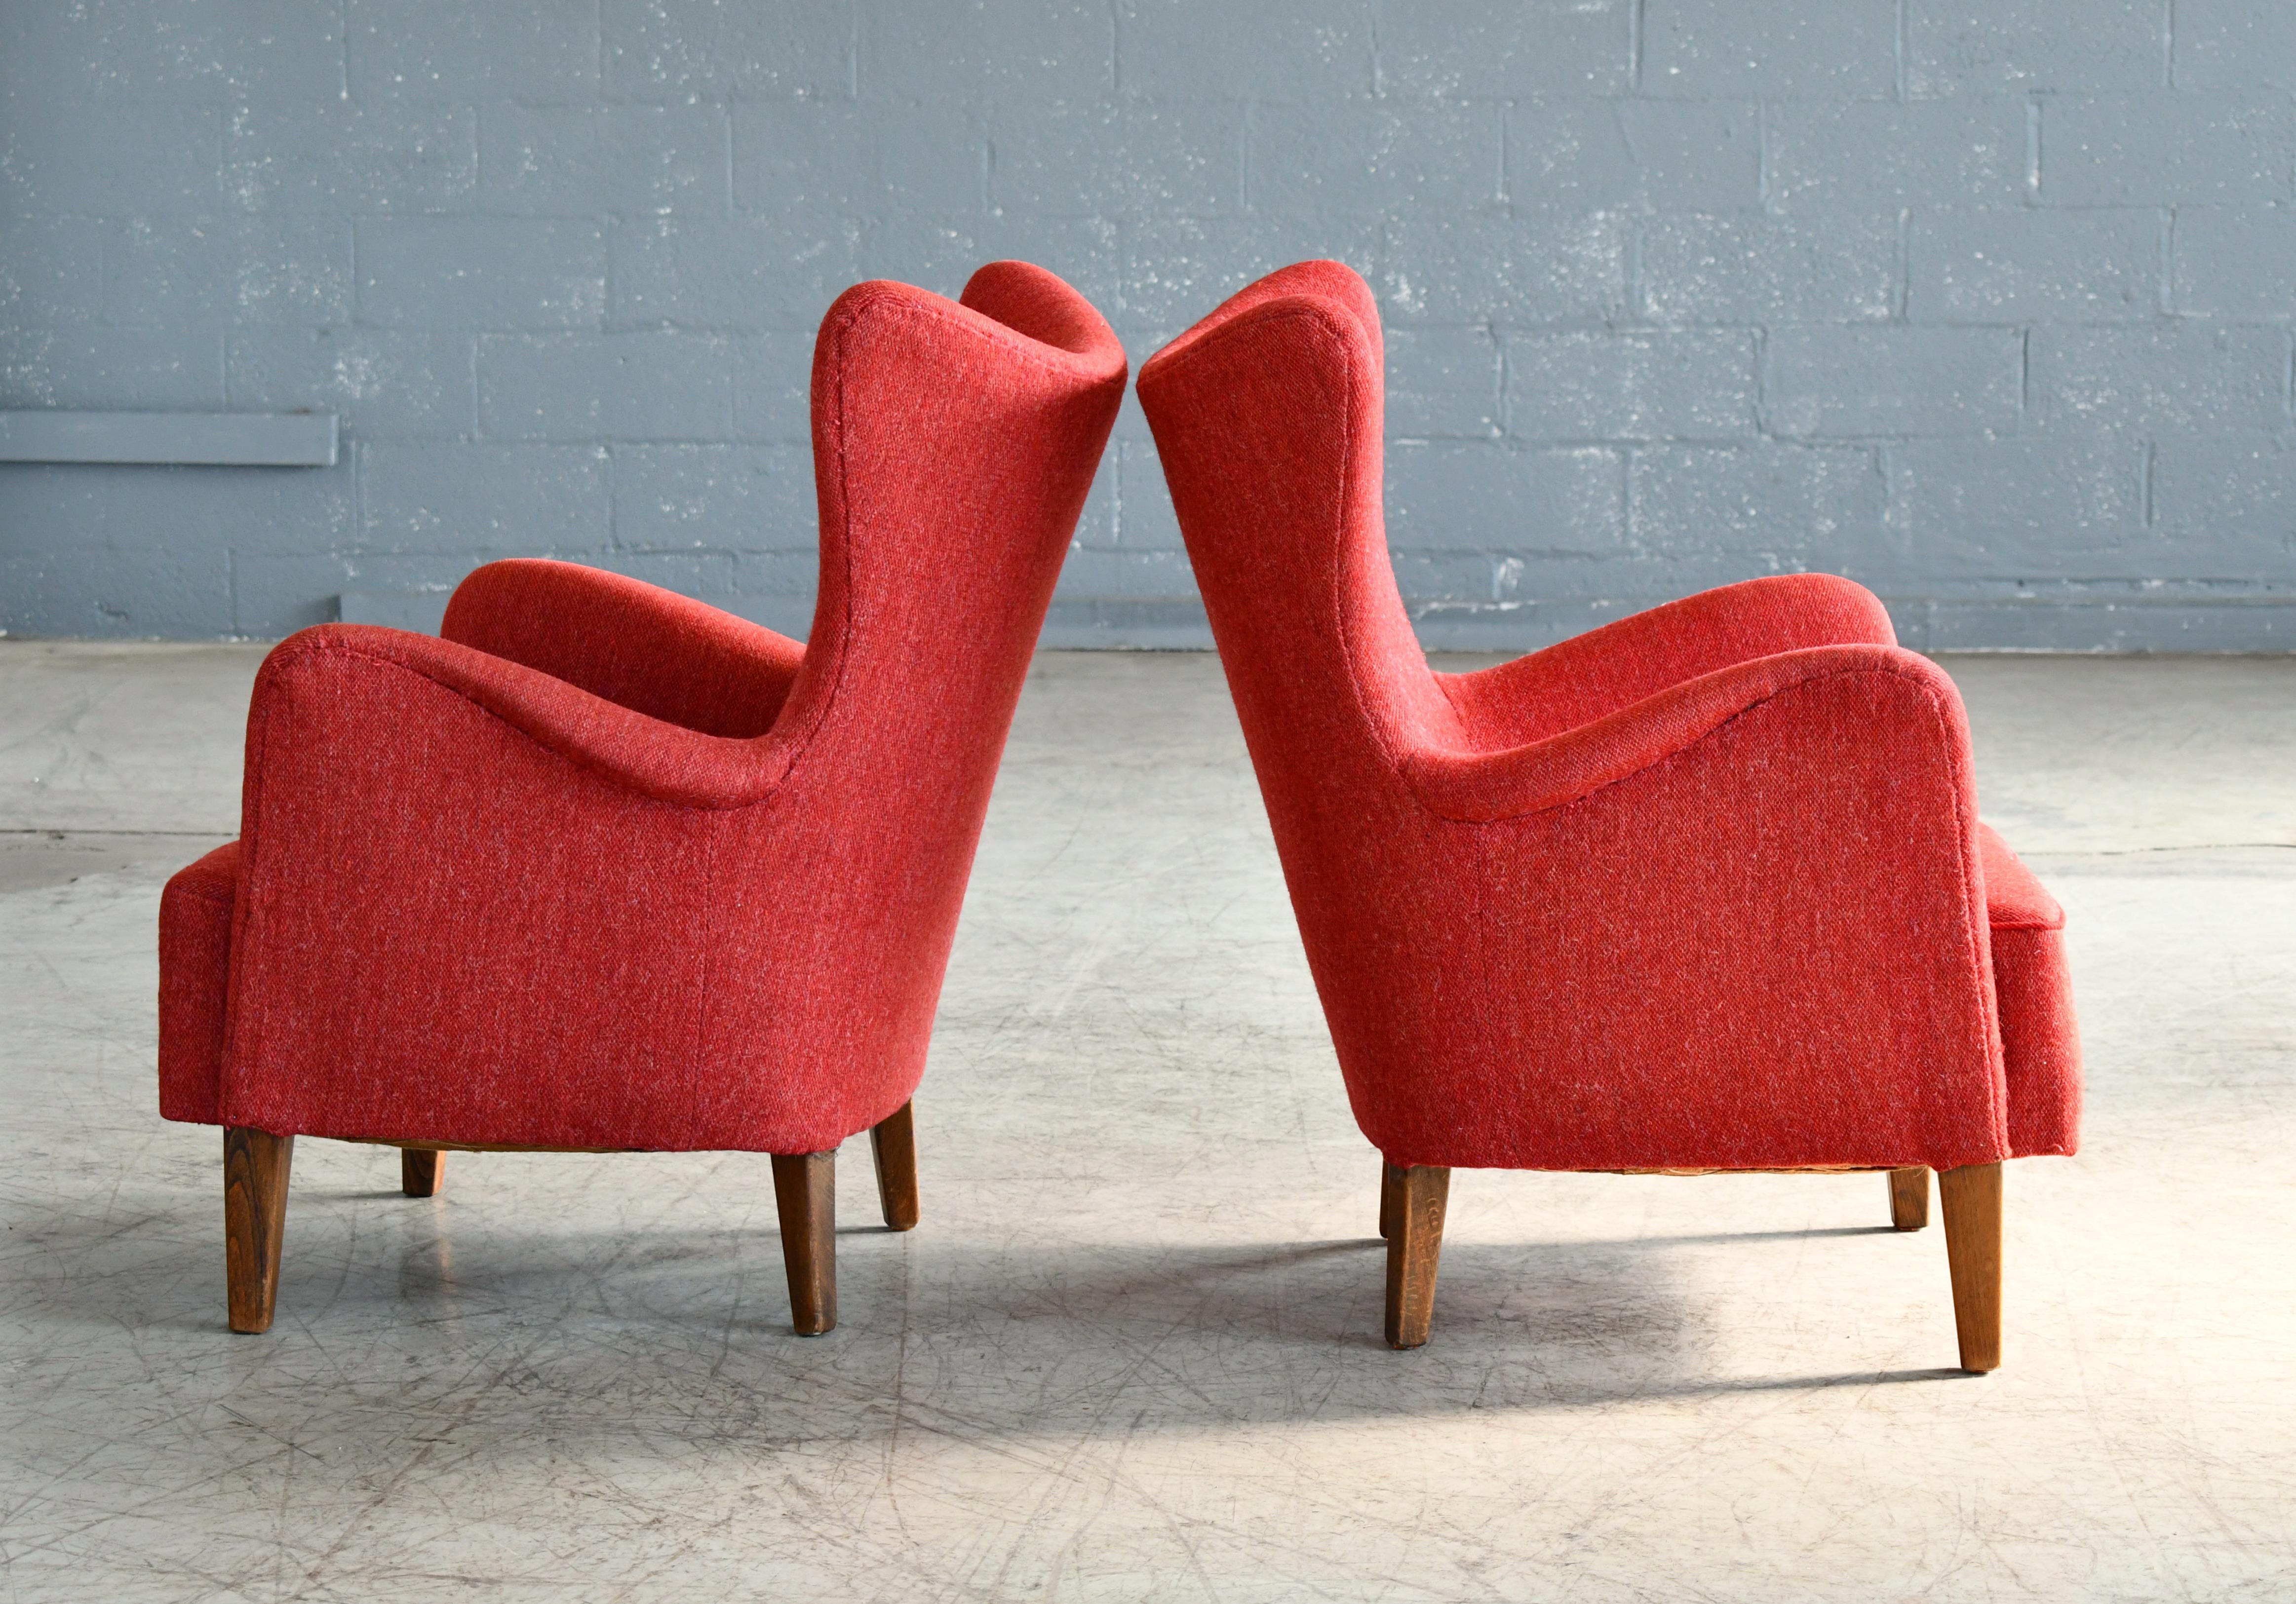 Wool Frode Holm Pair of Danish 1940s Lounge Chairs for Illums Original Sales Tag